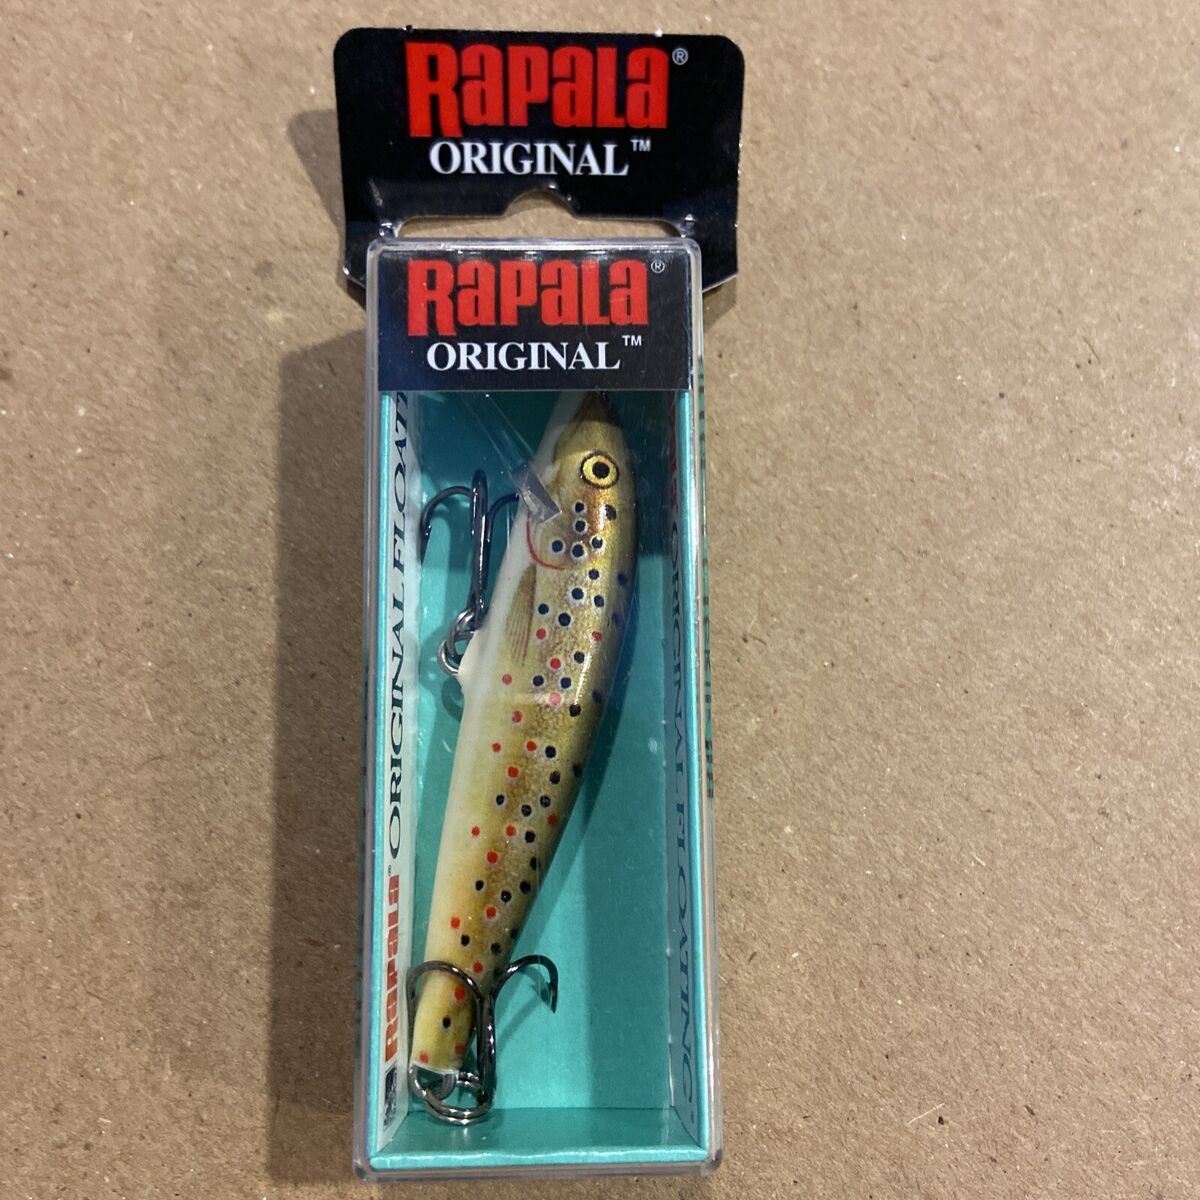 Rapala Original Floating F 7 F07 TR fishing lures 2-3/4 long Brown trout